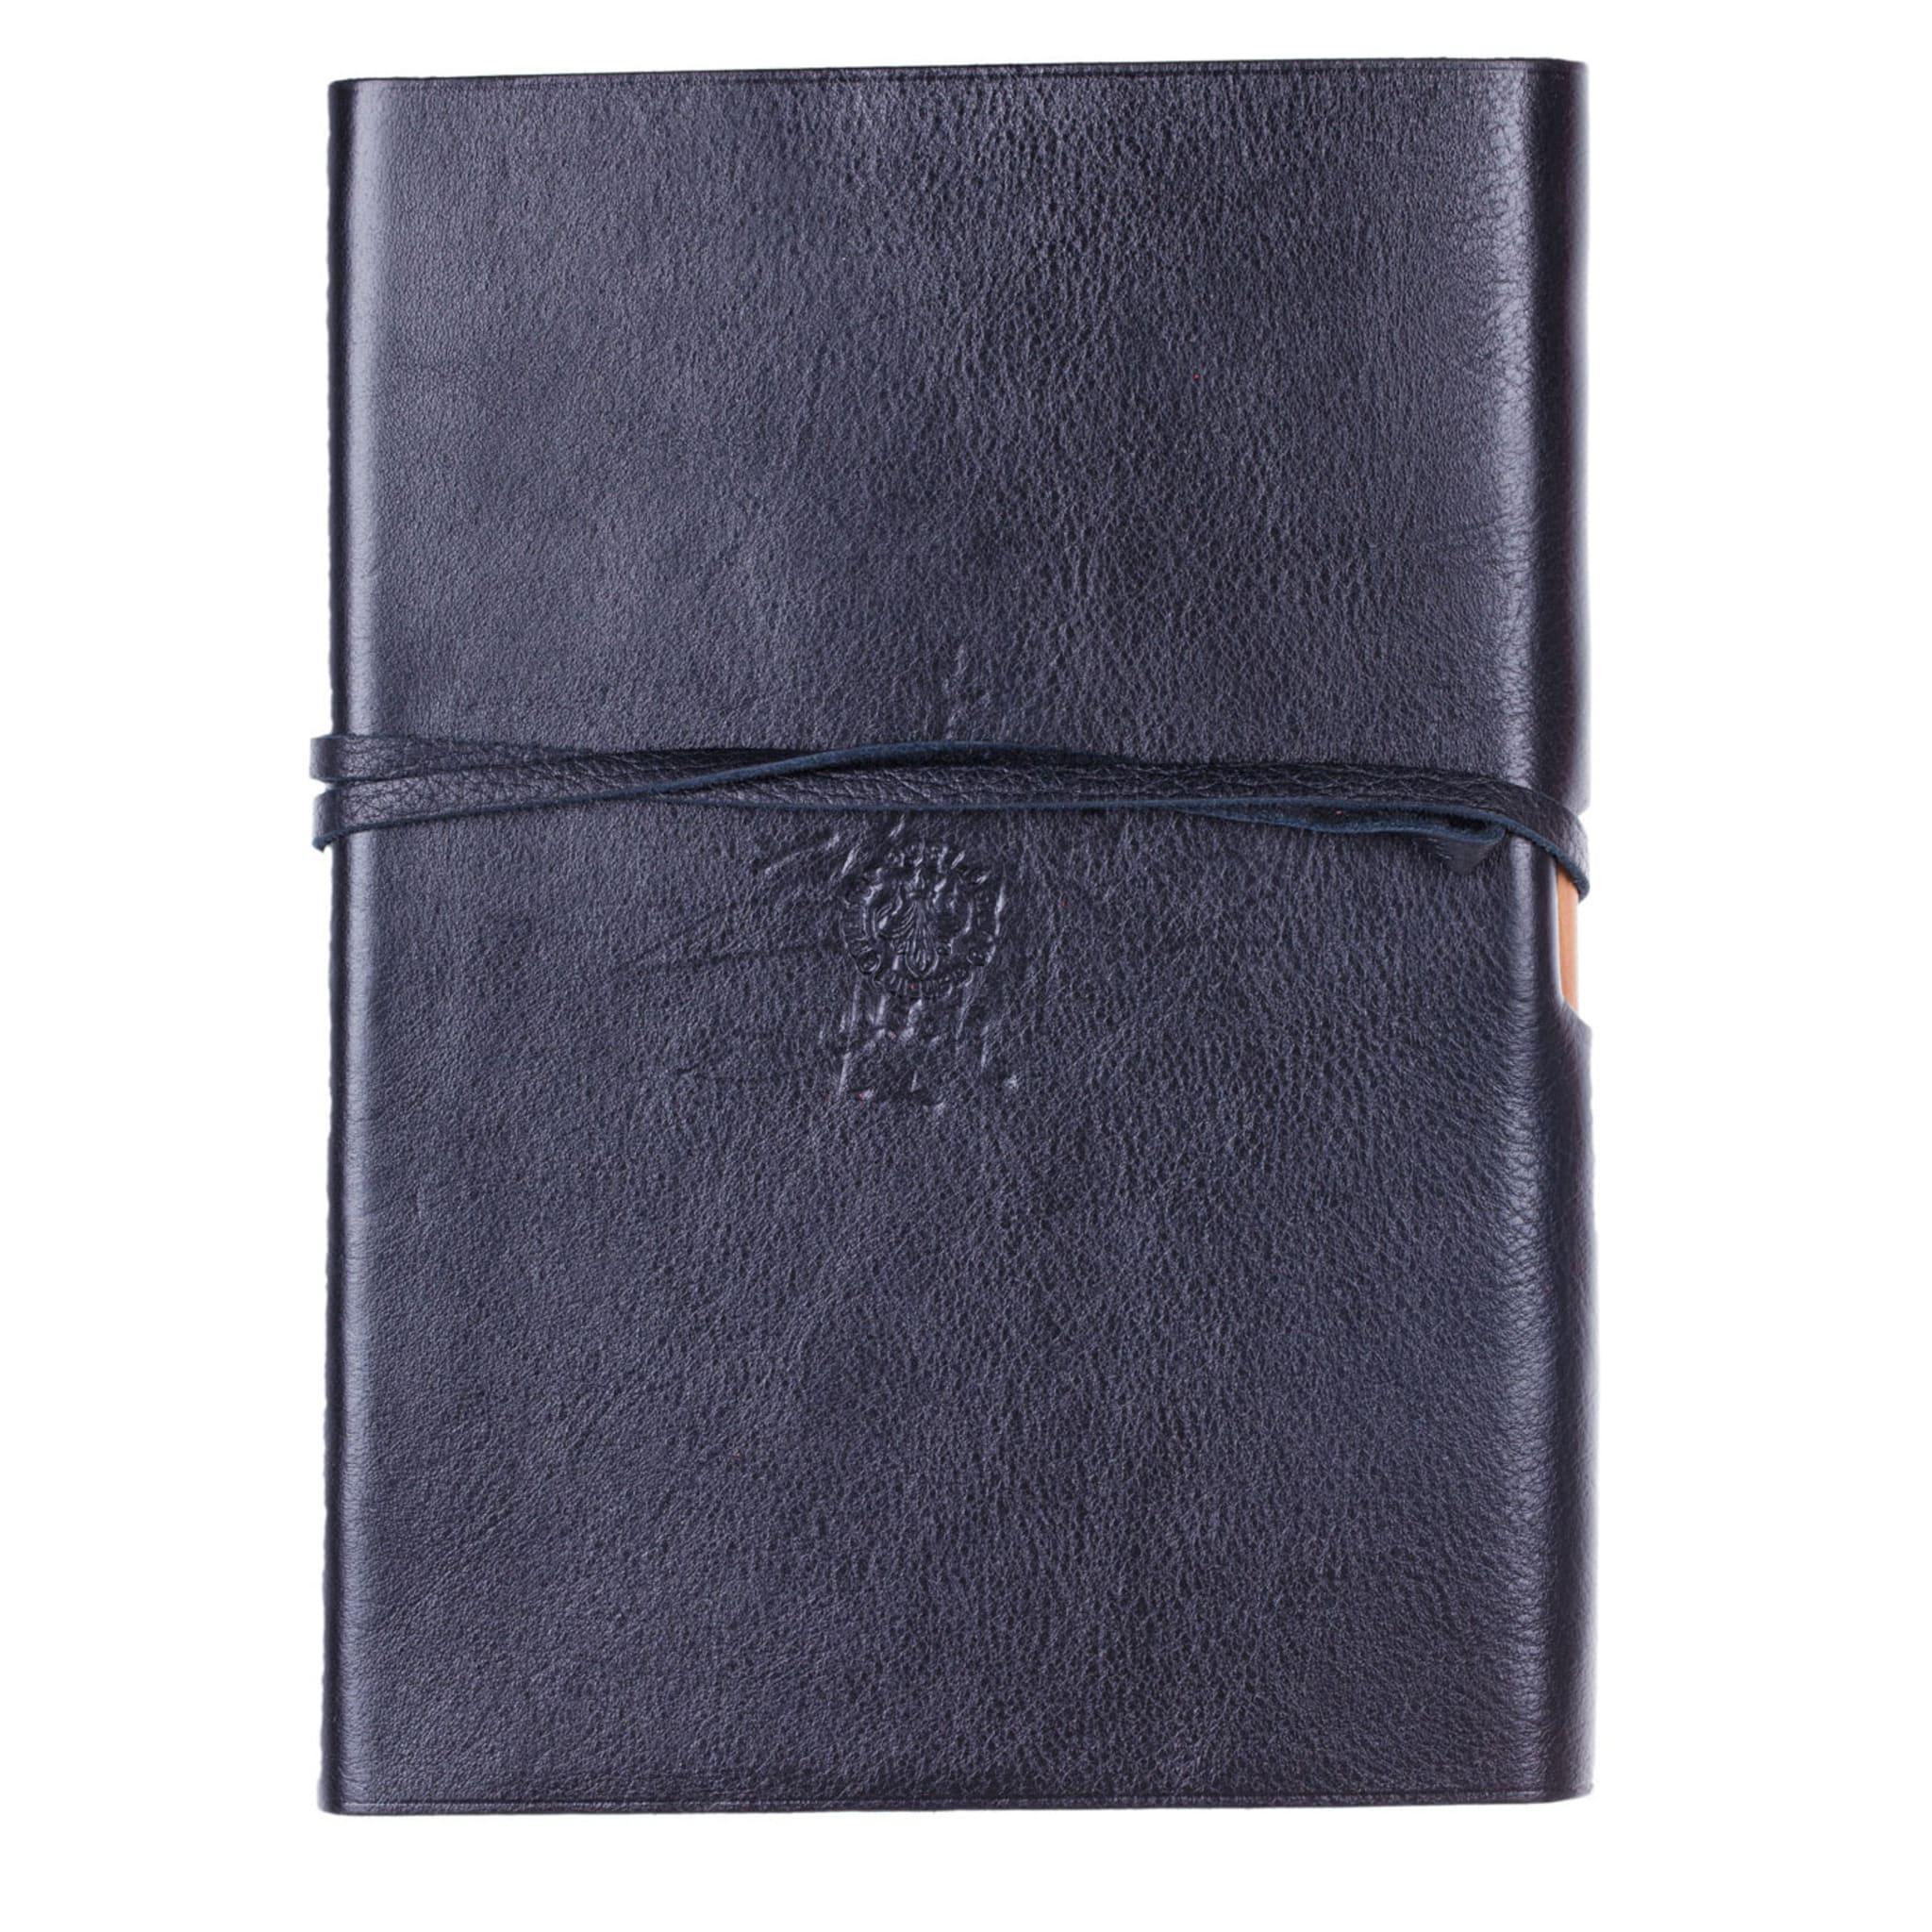 Lace Black Leather Notebook In New Condition For Sale In Milan, IT